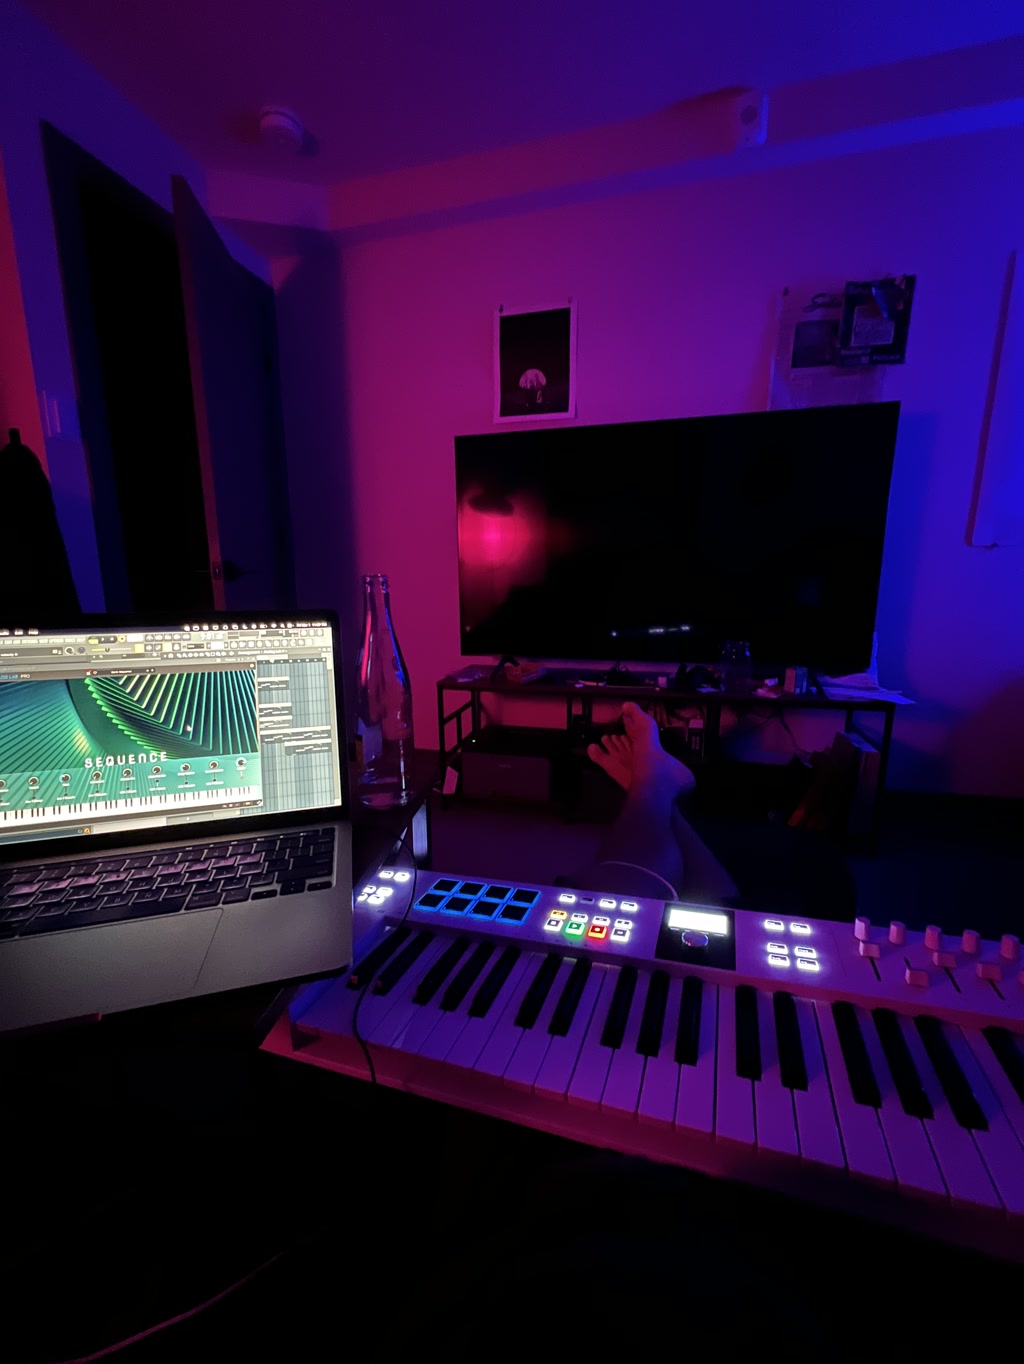 The setting is a dimly lit room with ambient lighting primarily in shades of blue and red. A laptop is open on a table with a music production software interface visible on its screen. In front of the laptop, there's a MIDI keyboard with illuminated pads and buttons. On the wall, there are two framed items, one appears to be a picture while the other is not clearly identifiable due to the lighting. There's a large flat-screen TV turned off on a stand across the room, and various items are scattered on the stand. The soft glow of multicolored lights gives the room a creative and relaxed atmosphere. There's a water bottle on the table and a person's feet are casually placed on an additional piece of furniture, indicating a comfortable, informal setting.